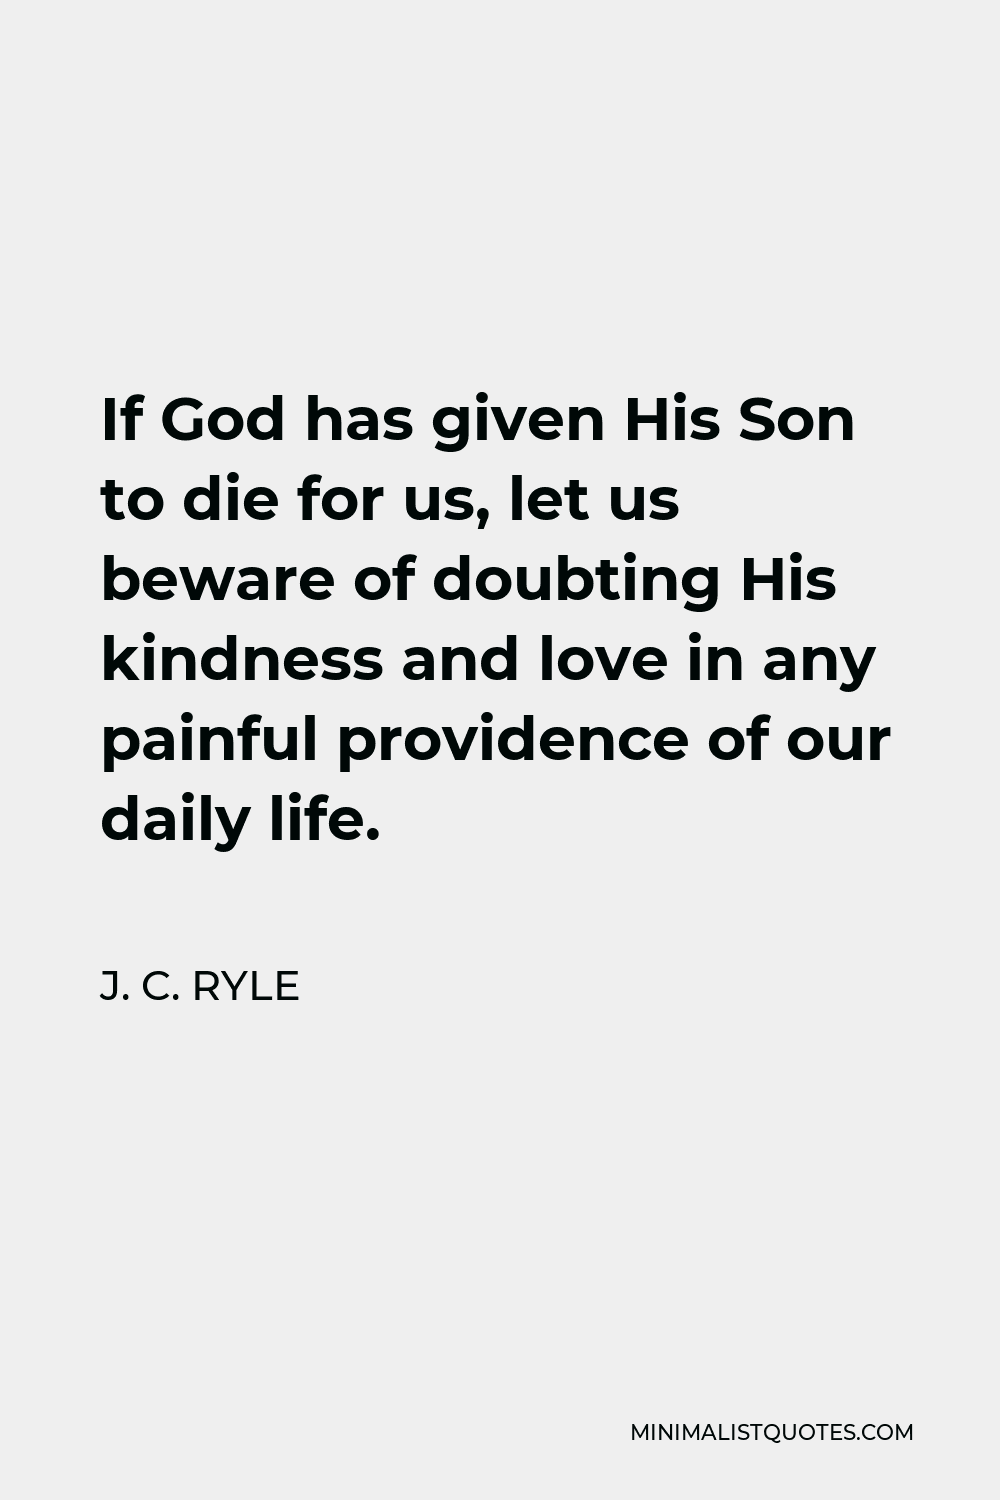 J. C. Ryle Quote - If God has given His Son to die for us, let us beware of doubting His kindness and love in any painful providence of our daily life.